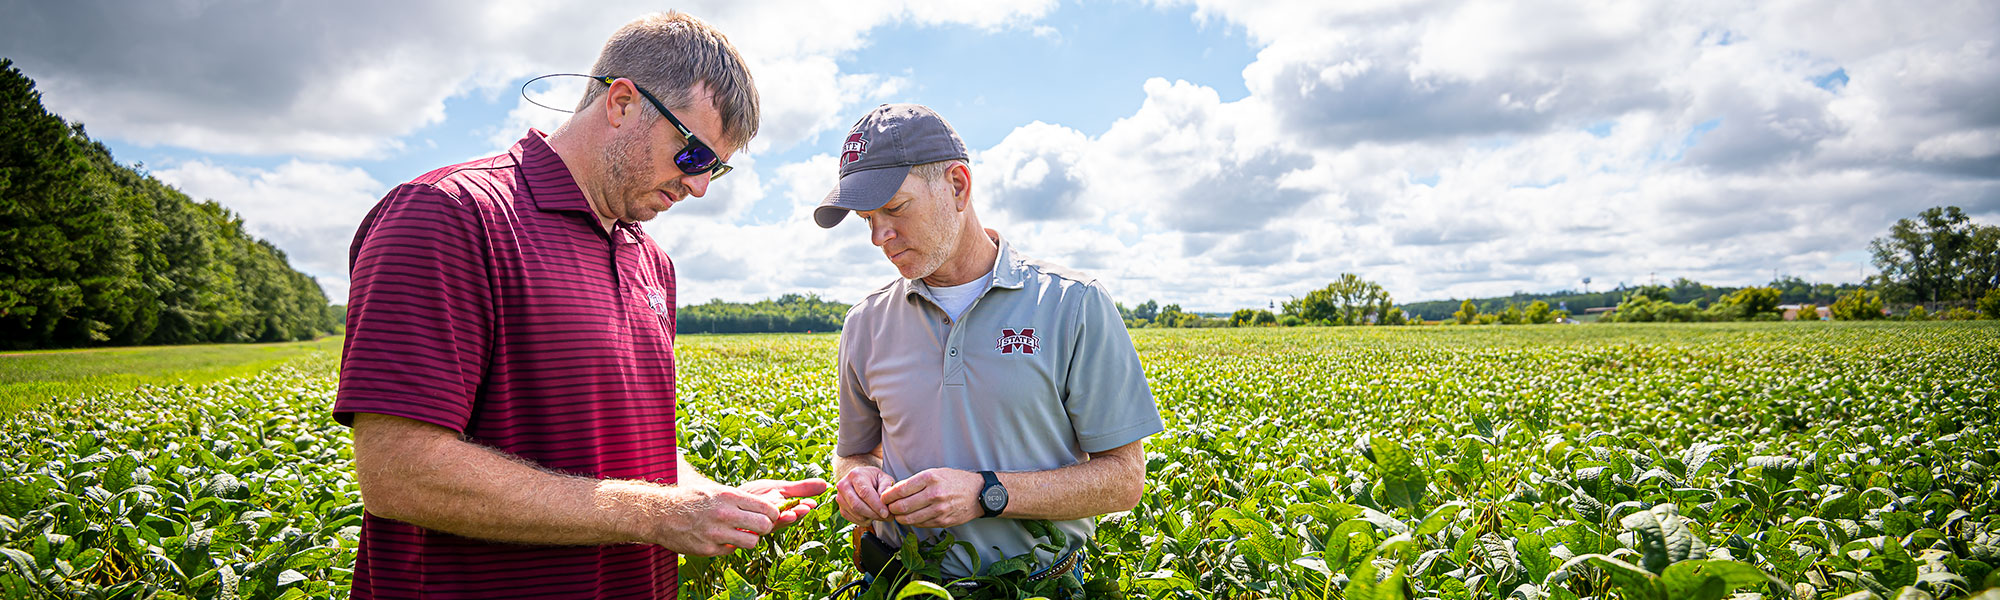 researchers looking at soybean in the field